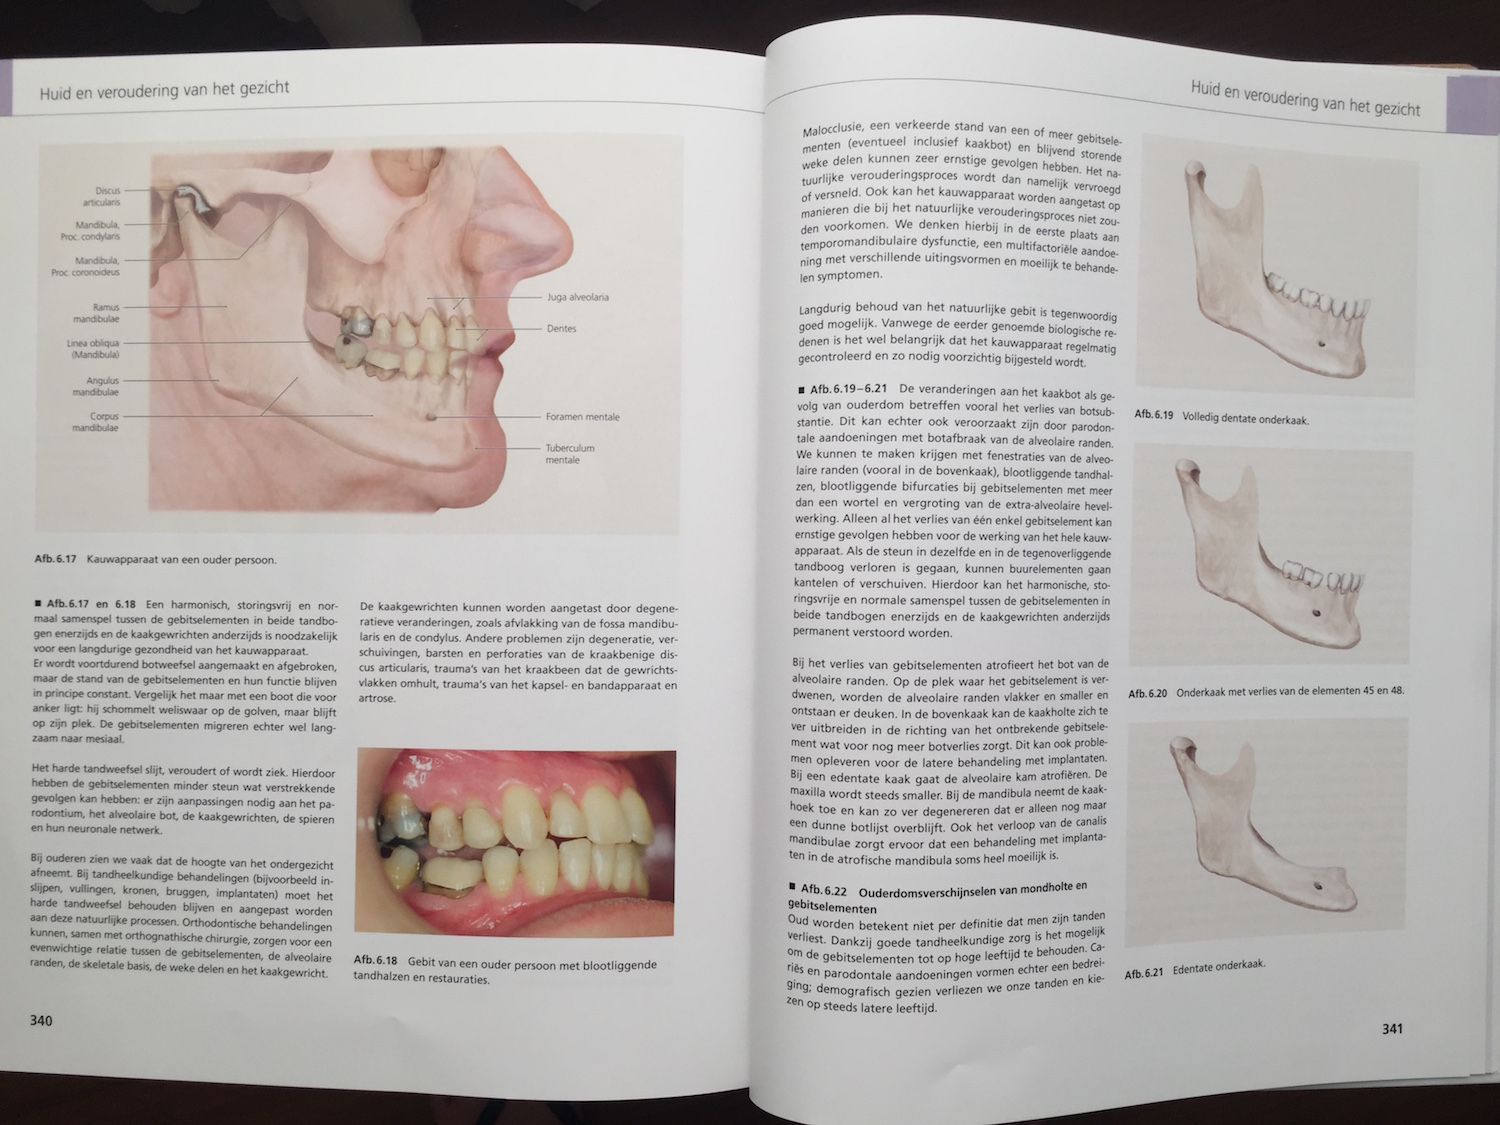 The Face Pictorial Atlas of Clinical Anatomy 